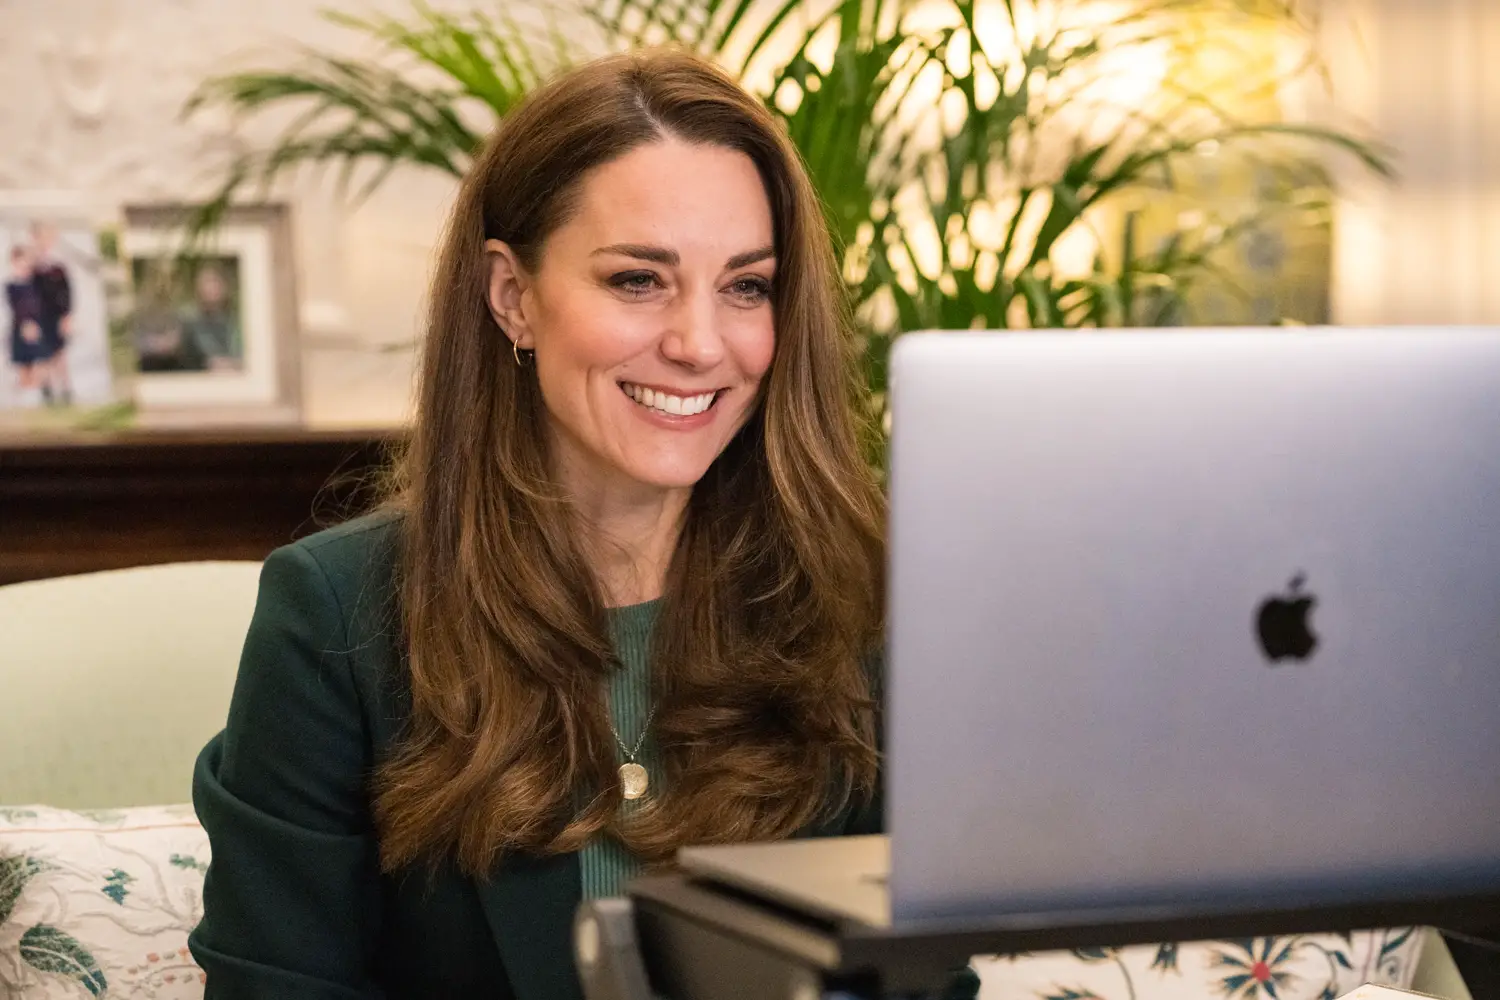 The Duchess of Cambridge looked gorgeous in green for a video call to parents